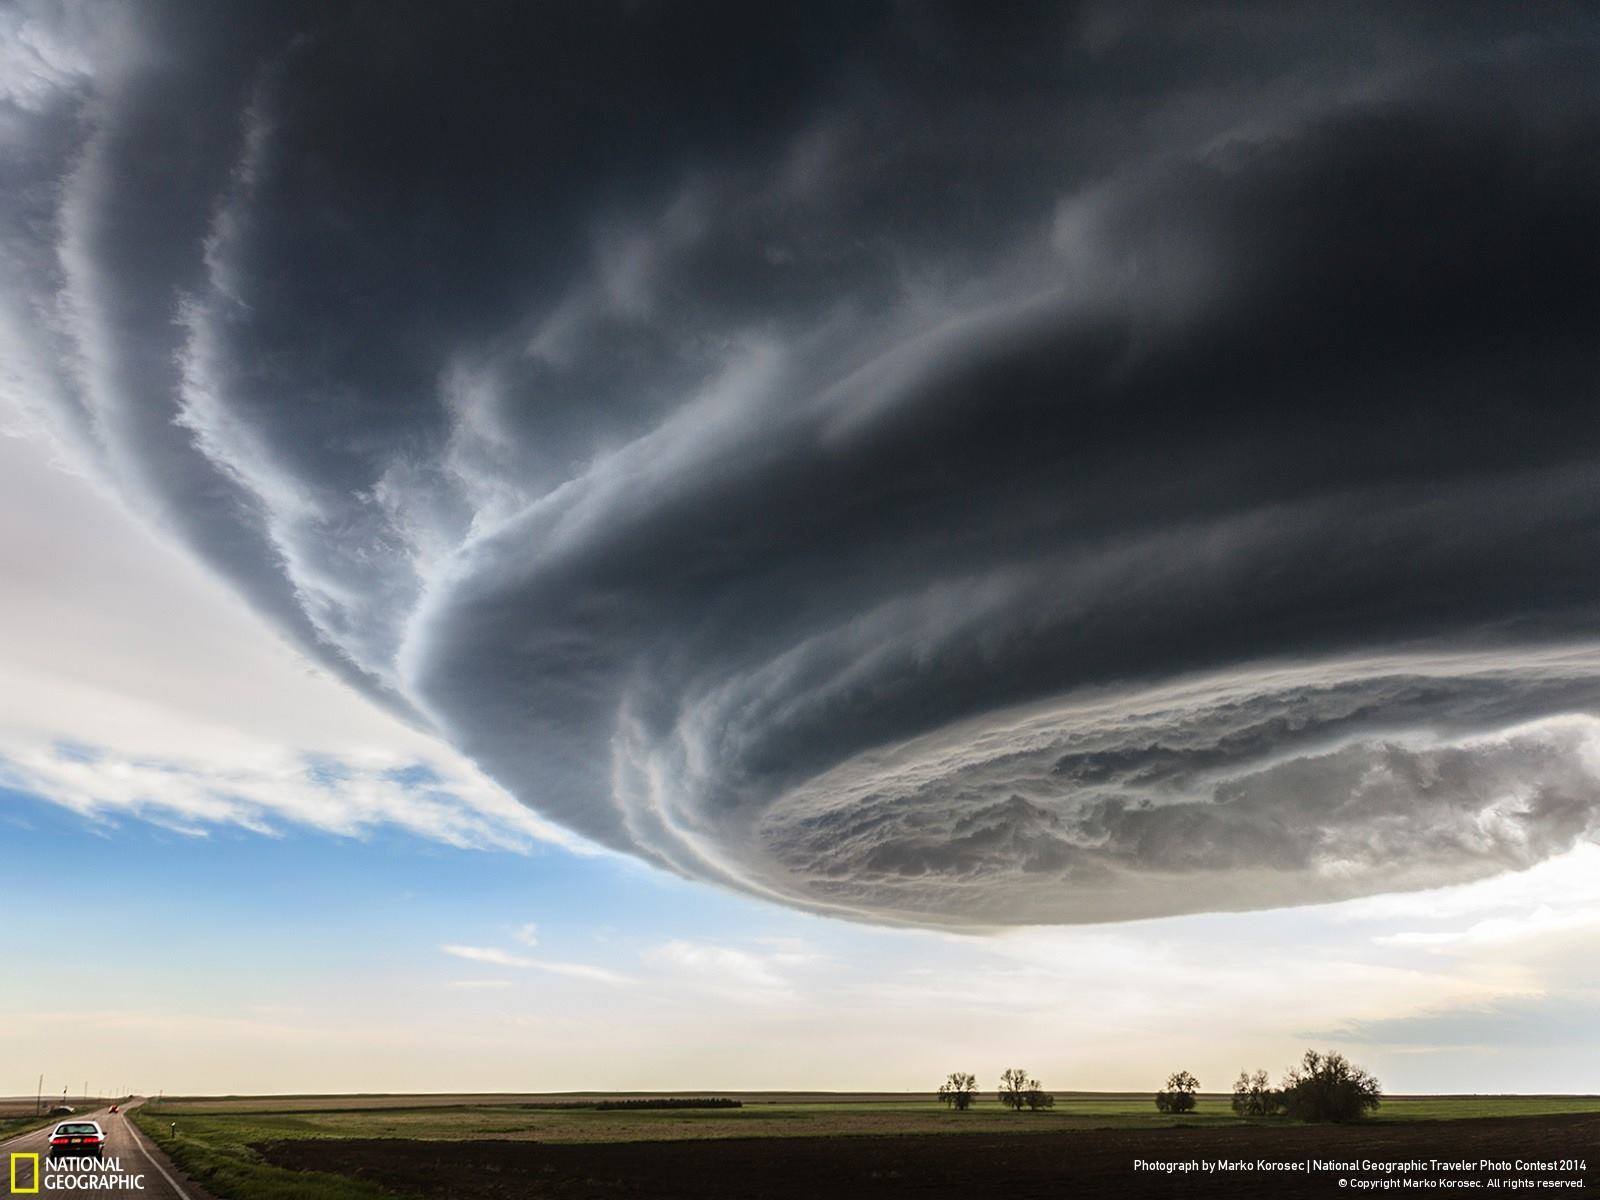 Amazing photo of a supercell thunderstorm in Colorado